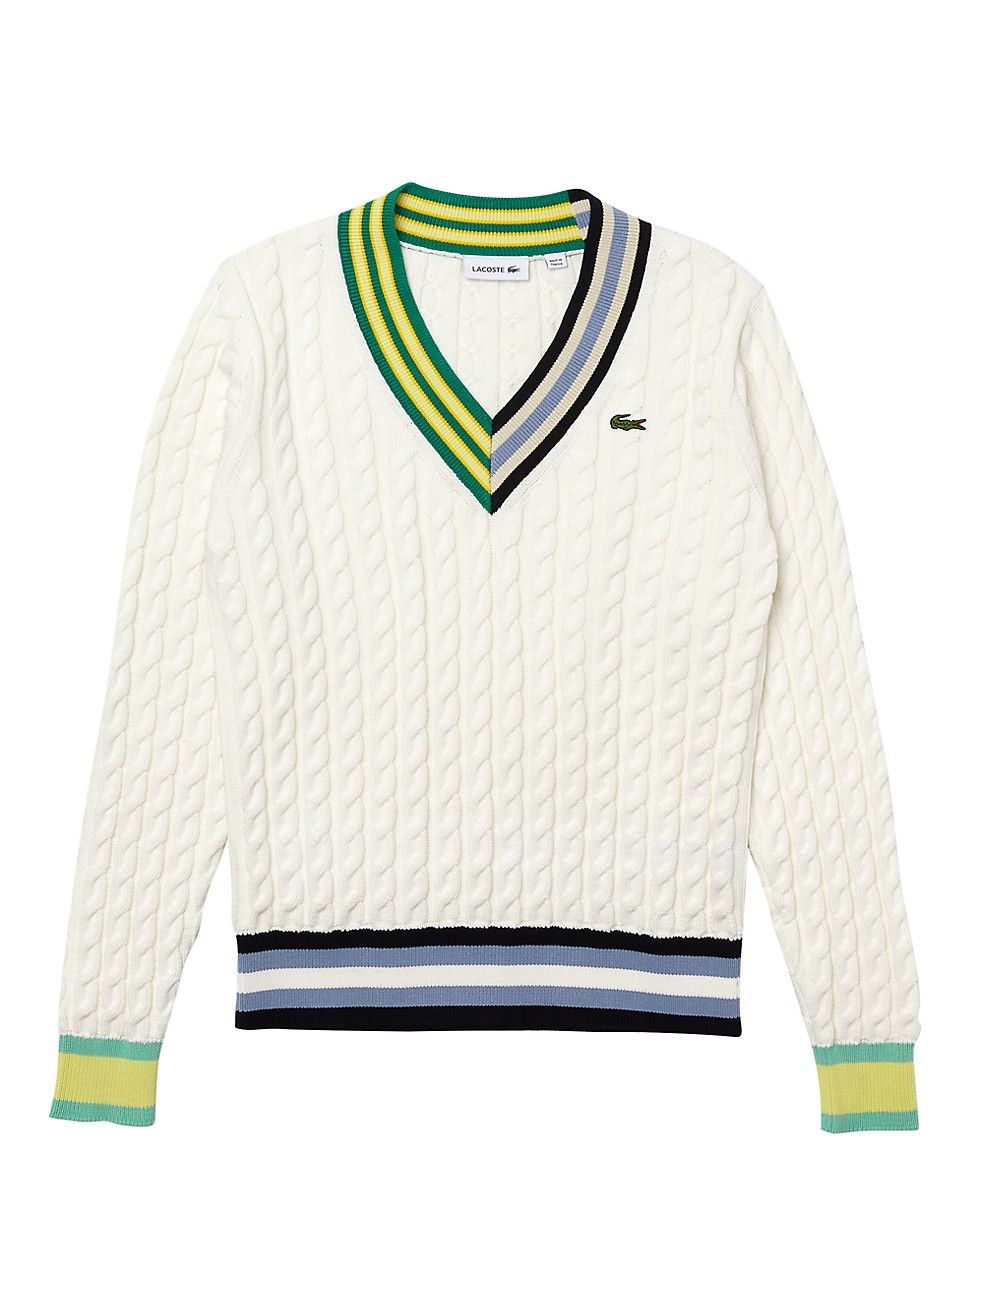 The Best Tennis Sweaters in 2023 — Stylish Knit Tops for Tennis